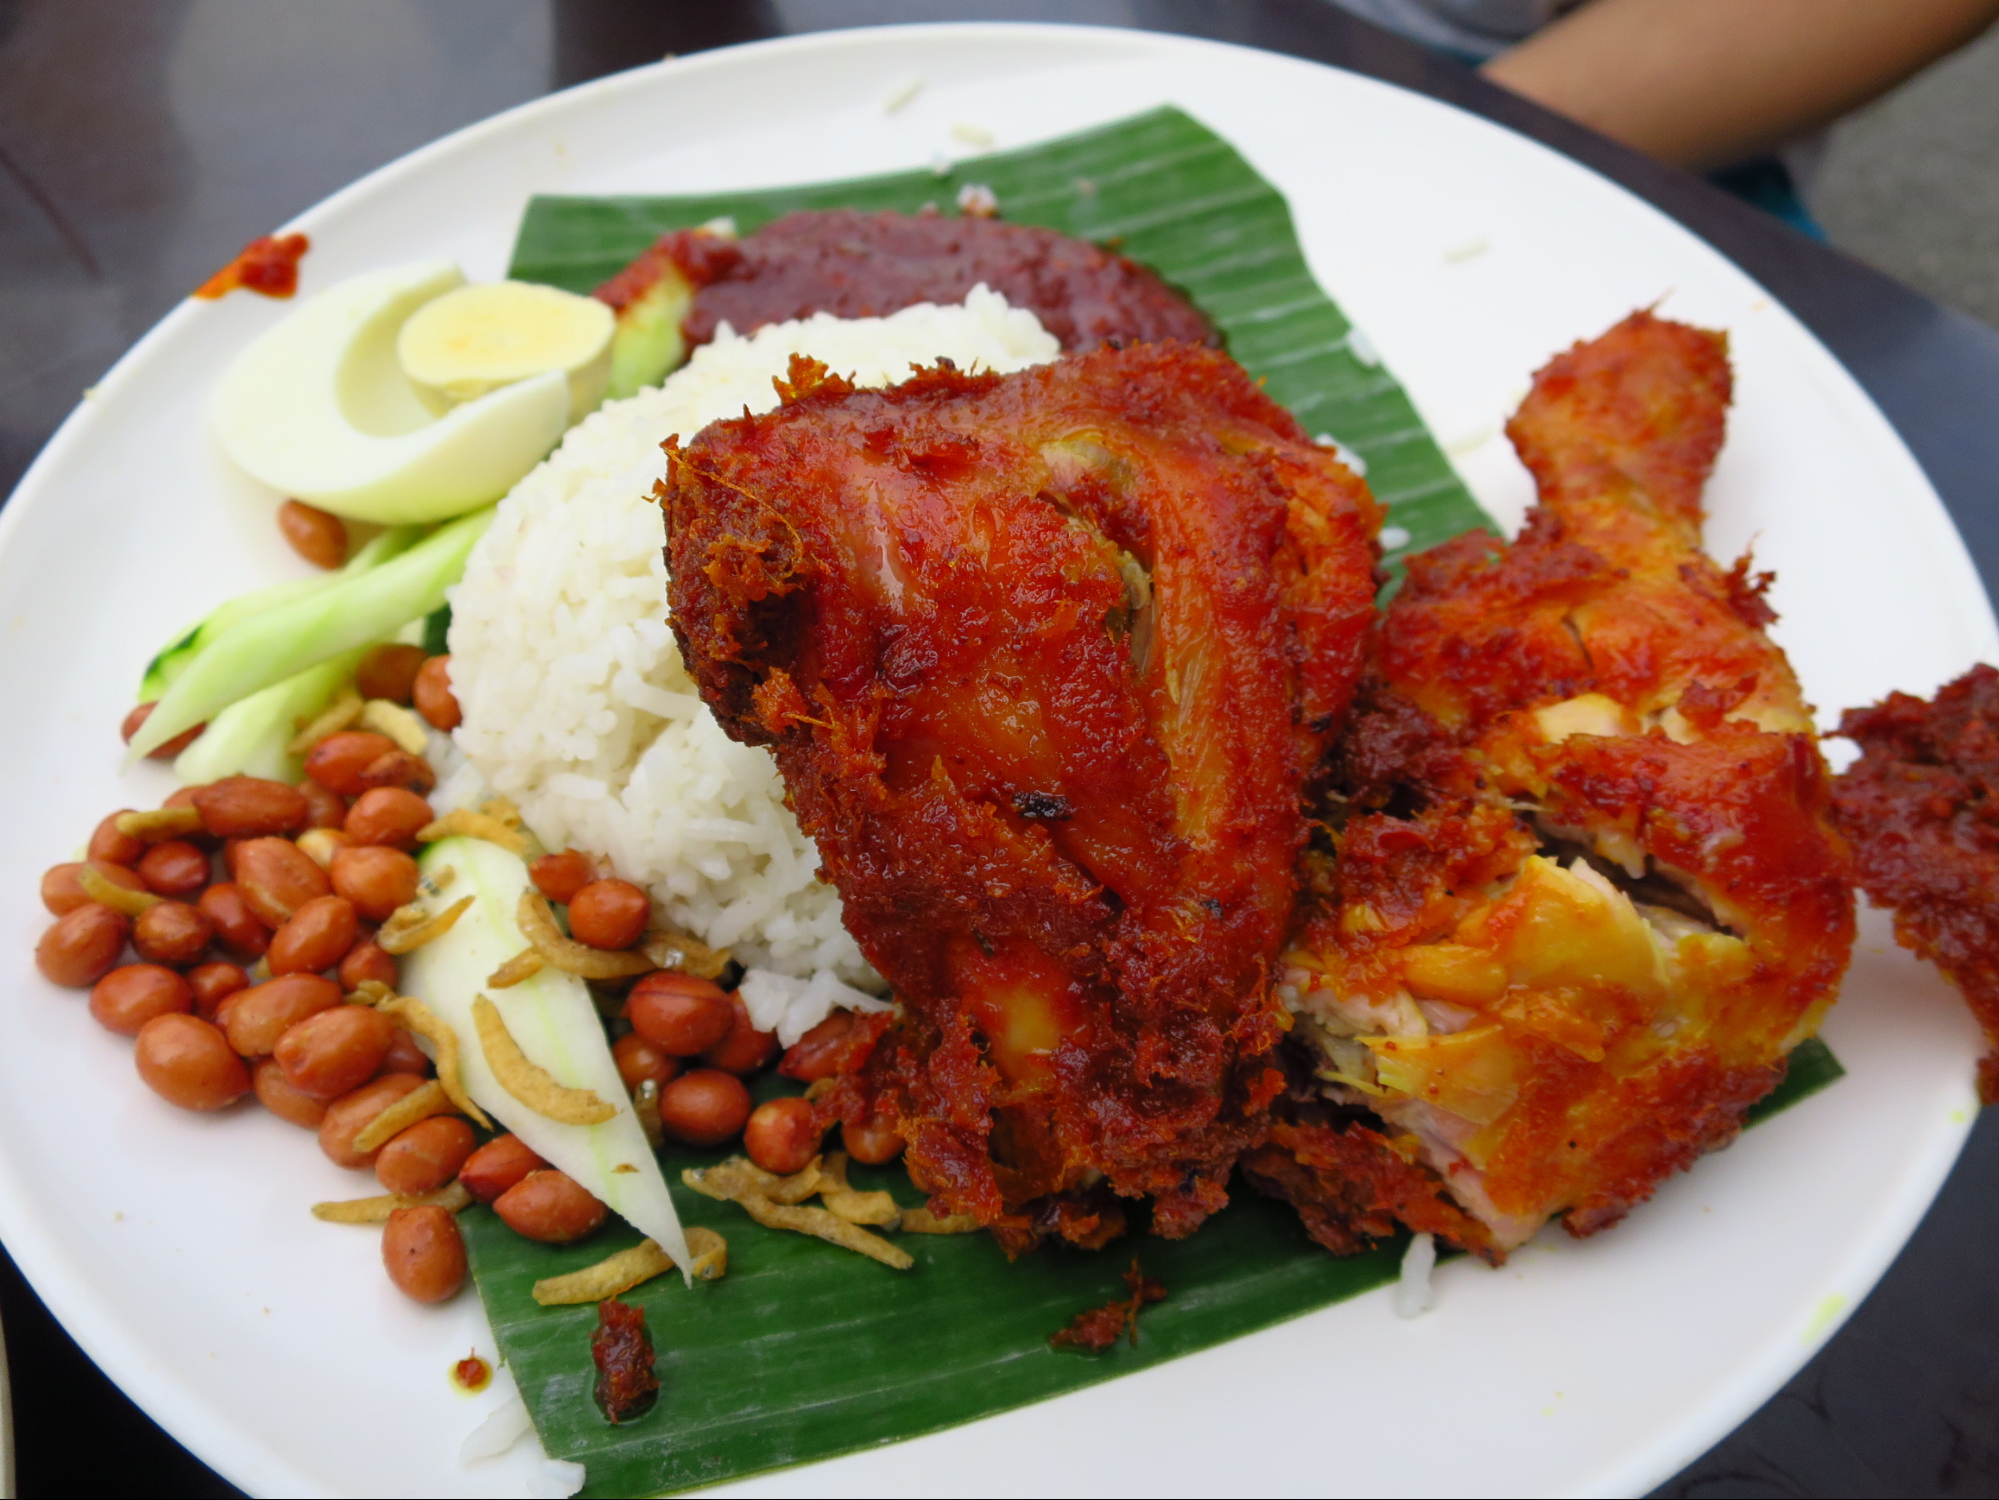 20 All-Star Local Food In KL That Will Keep You Coming Back For More